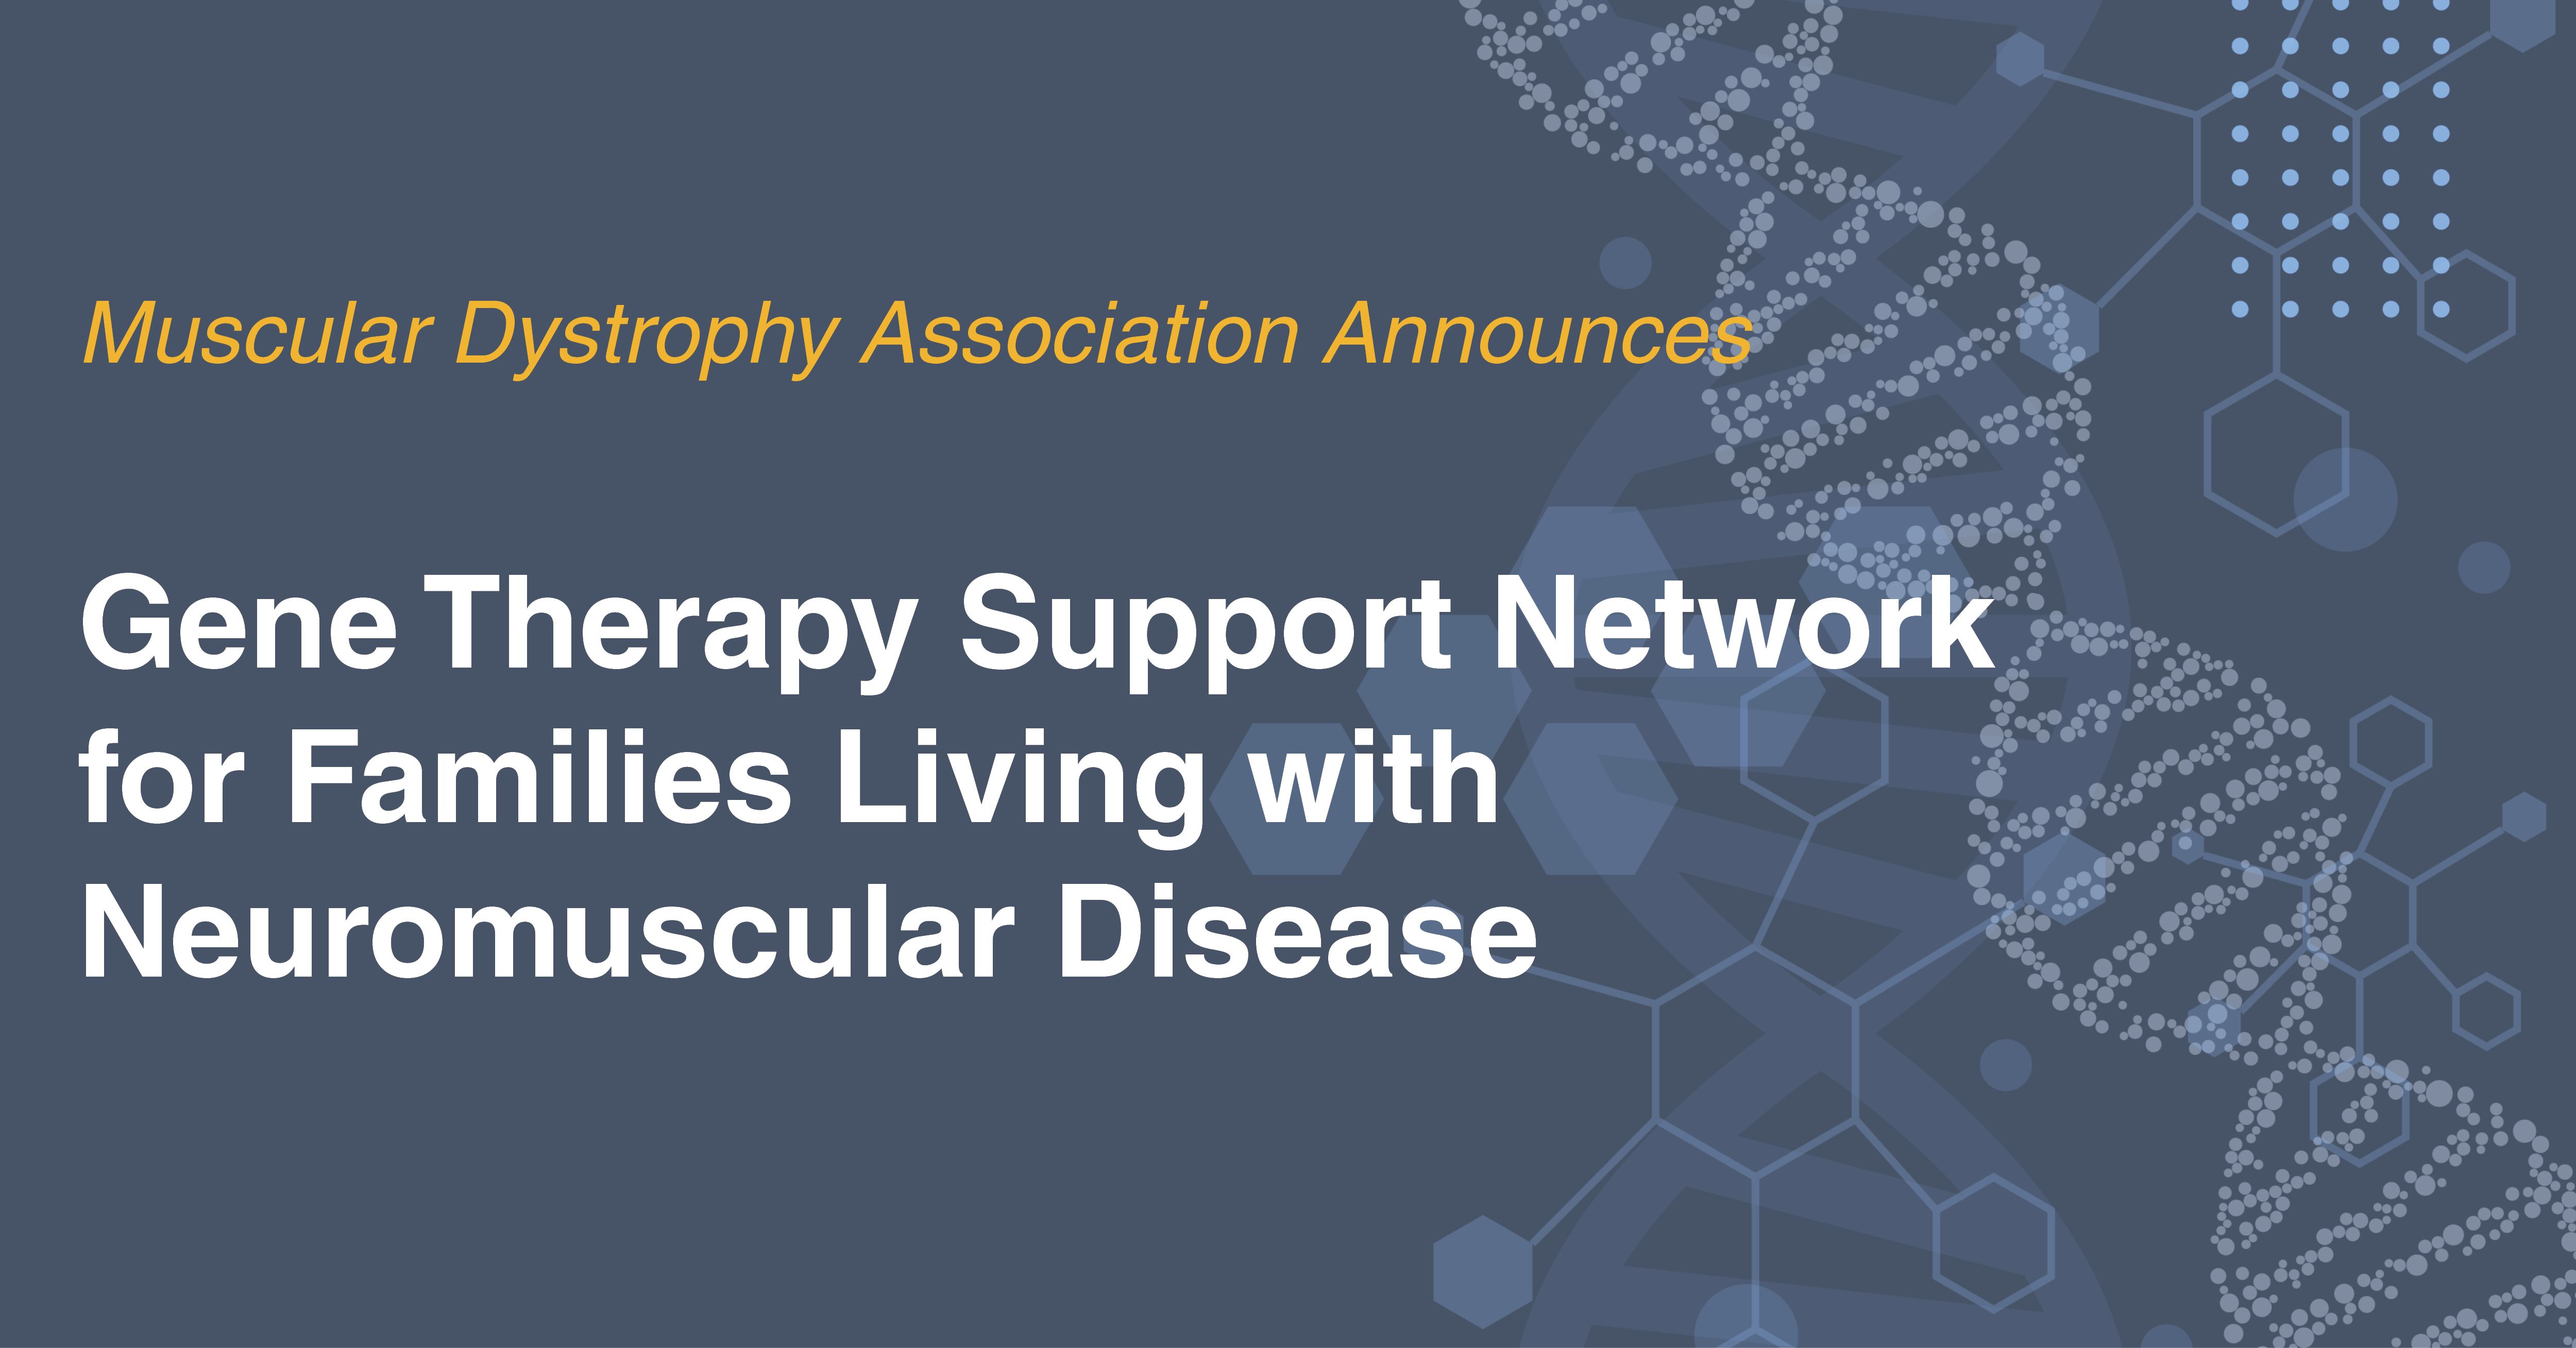 MDA Announces Gene Therapy Support Network